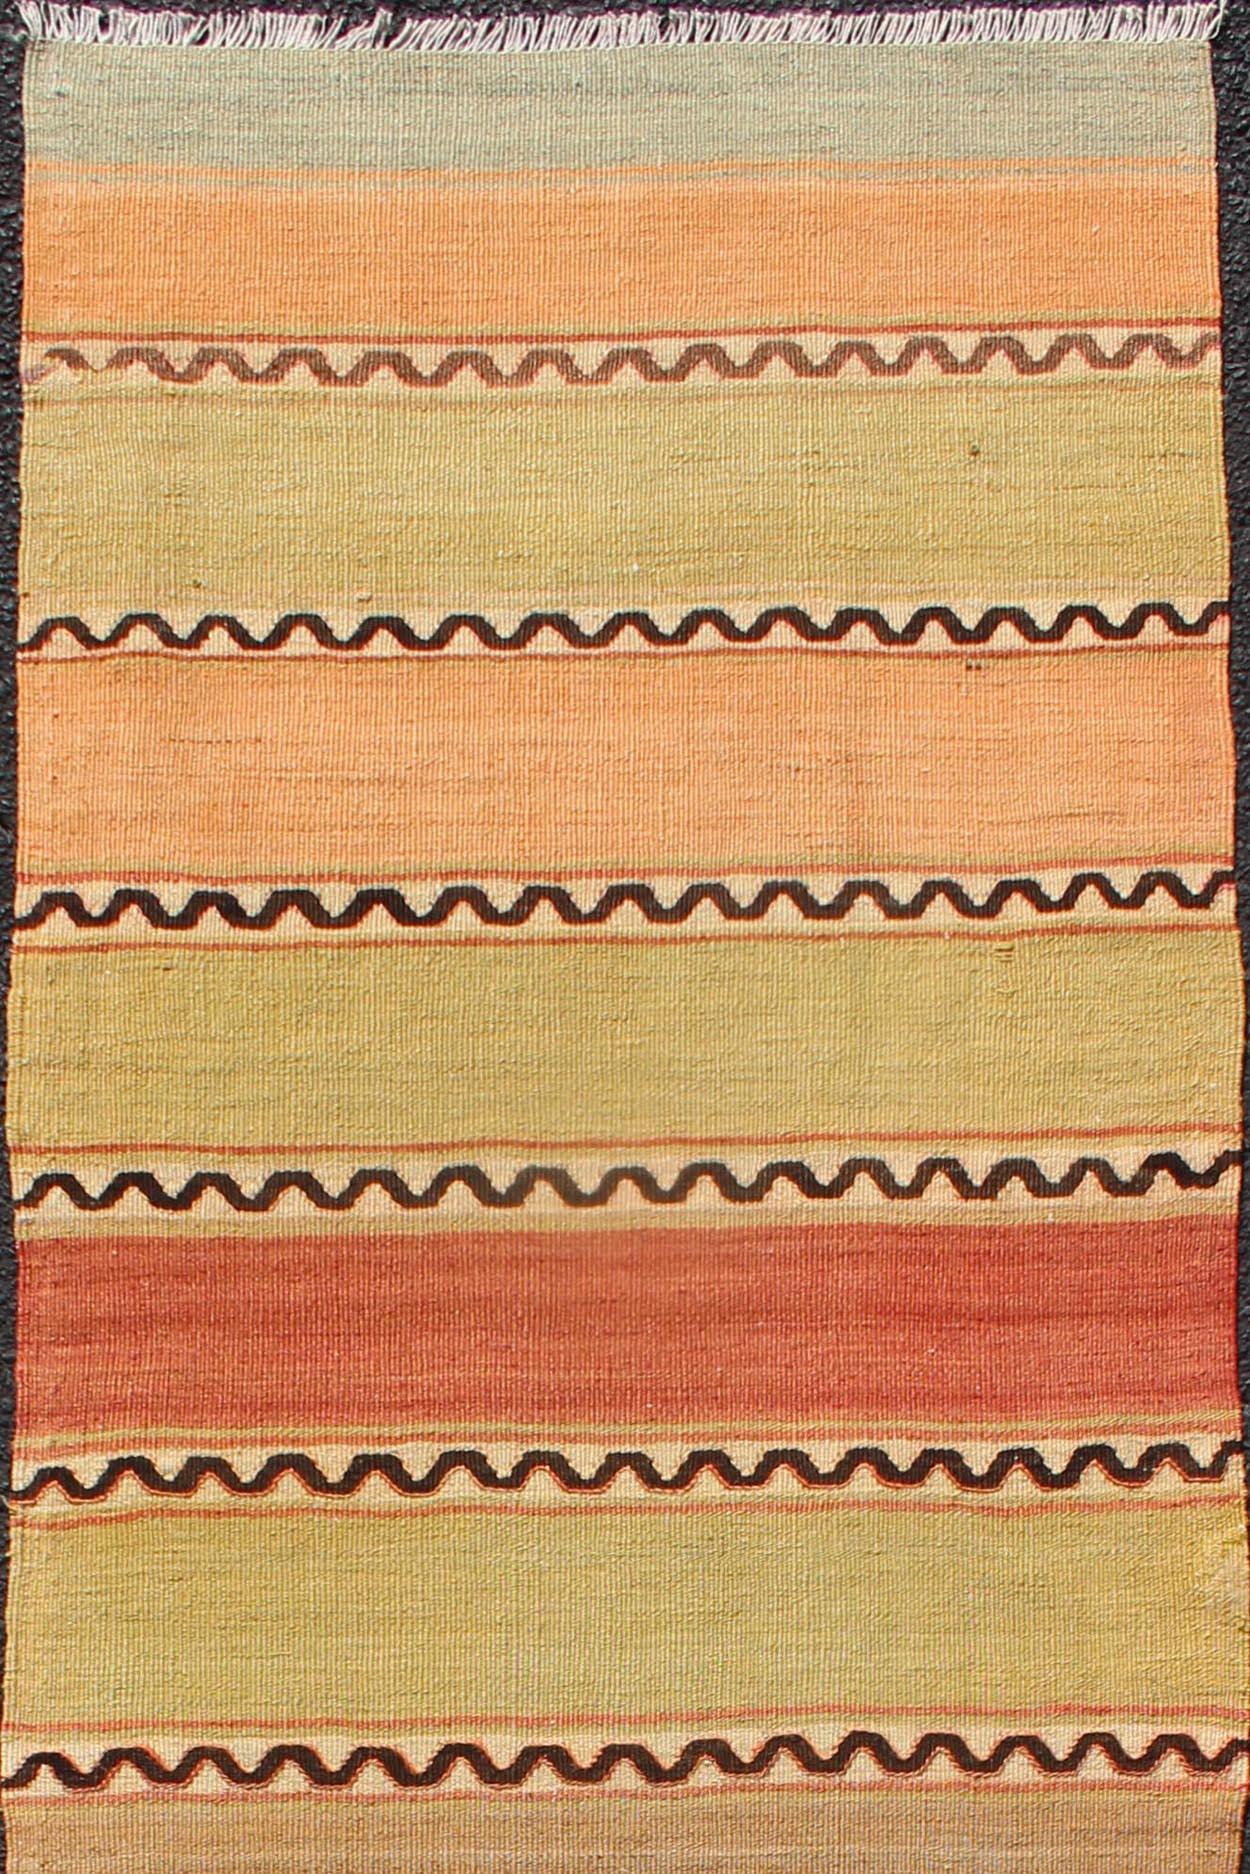 Turkish Kilim runner with stripes in red, green, yellow, orange, Keivan Woven Arts / rug TU-NED-635, country of origin / type: Turkey / Kilim, circa mid-20th century

Woven during the mid-20th century in Turkey, this Kilim is decorated with a